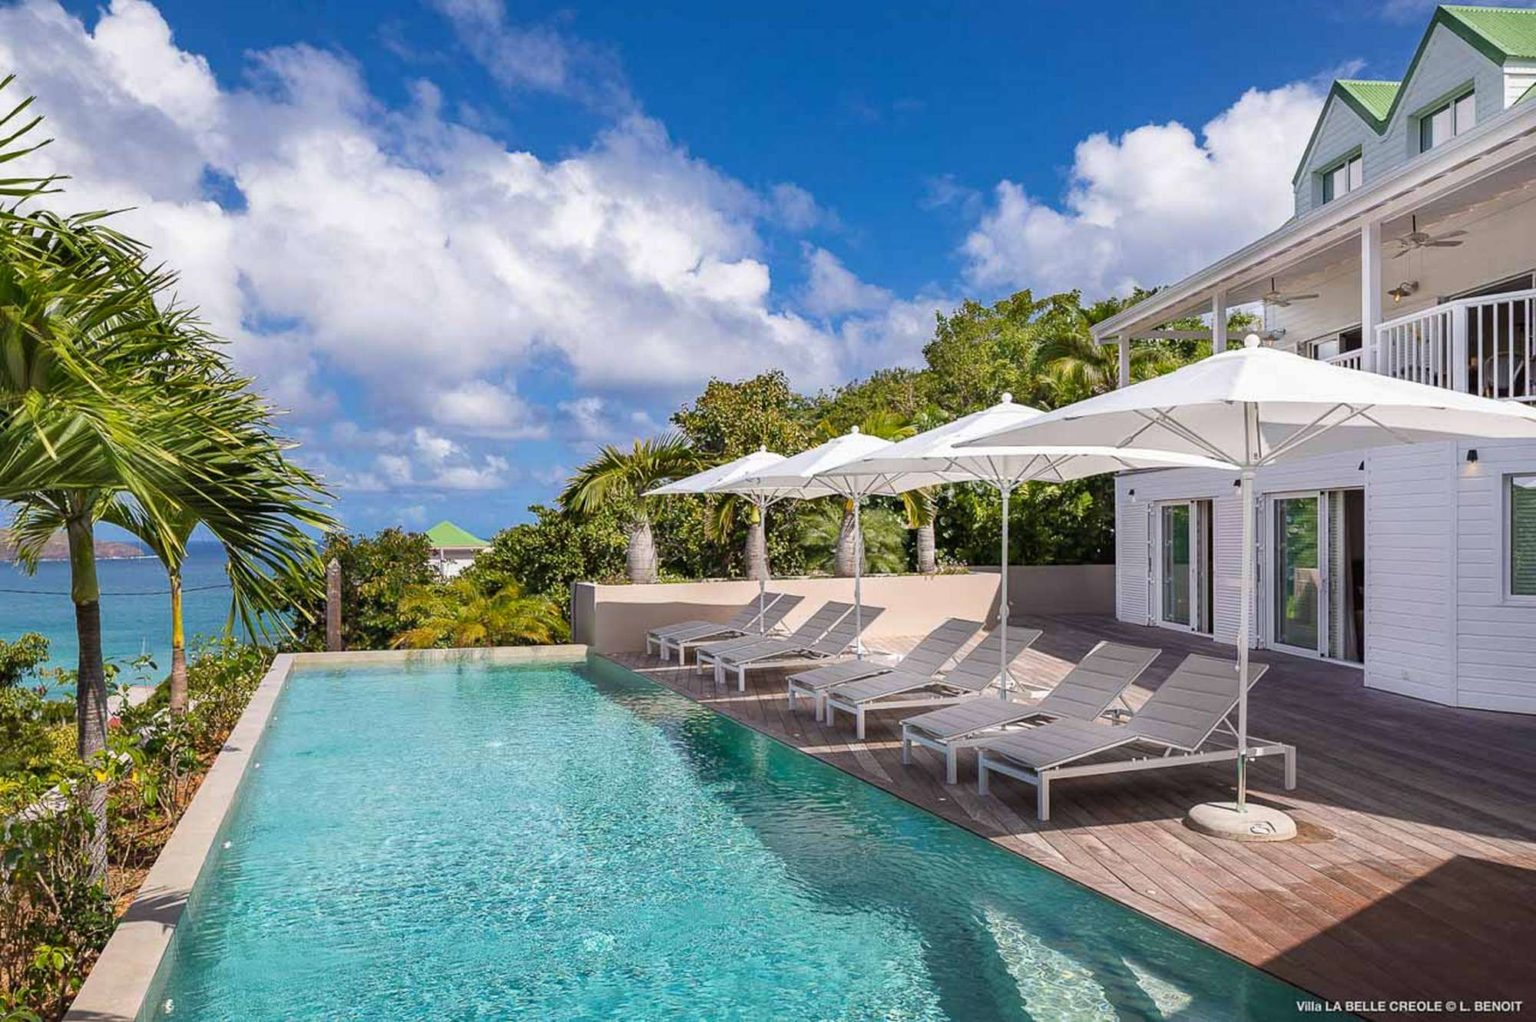 Top 7 New Luxury Villas to Rent in the Caribbean - World inside pictures